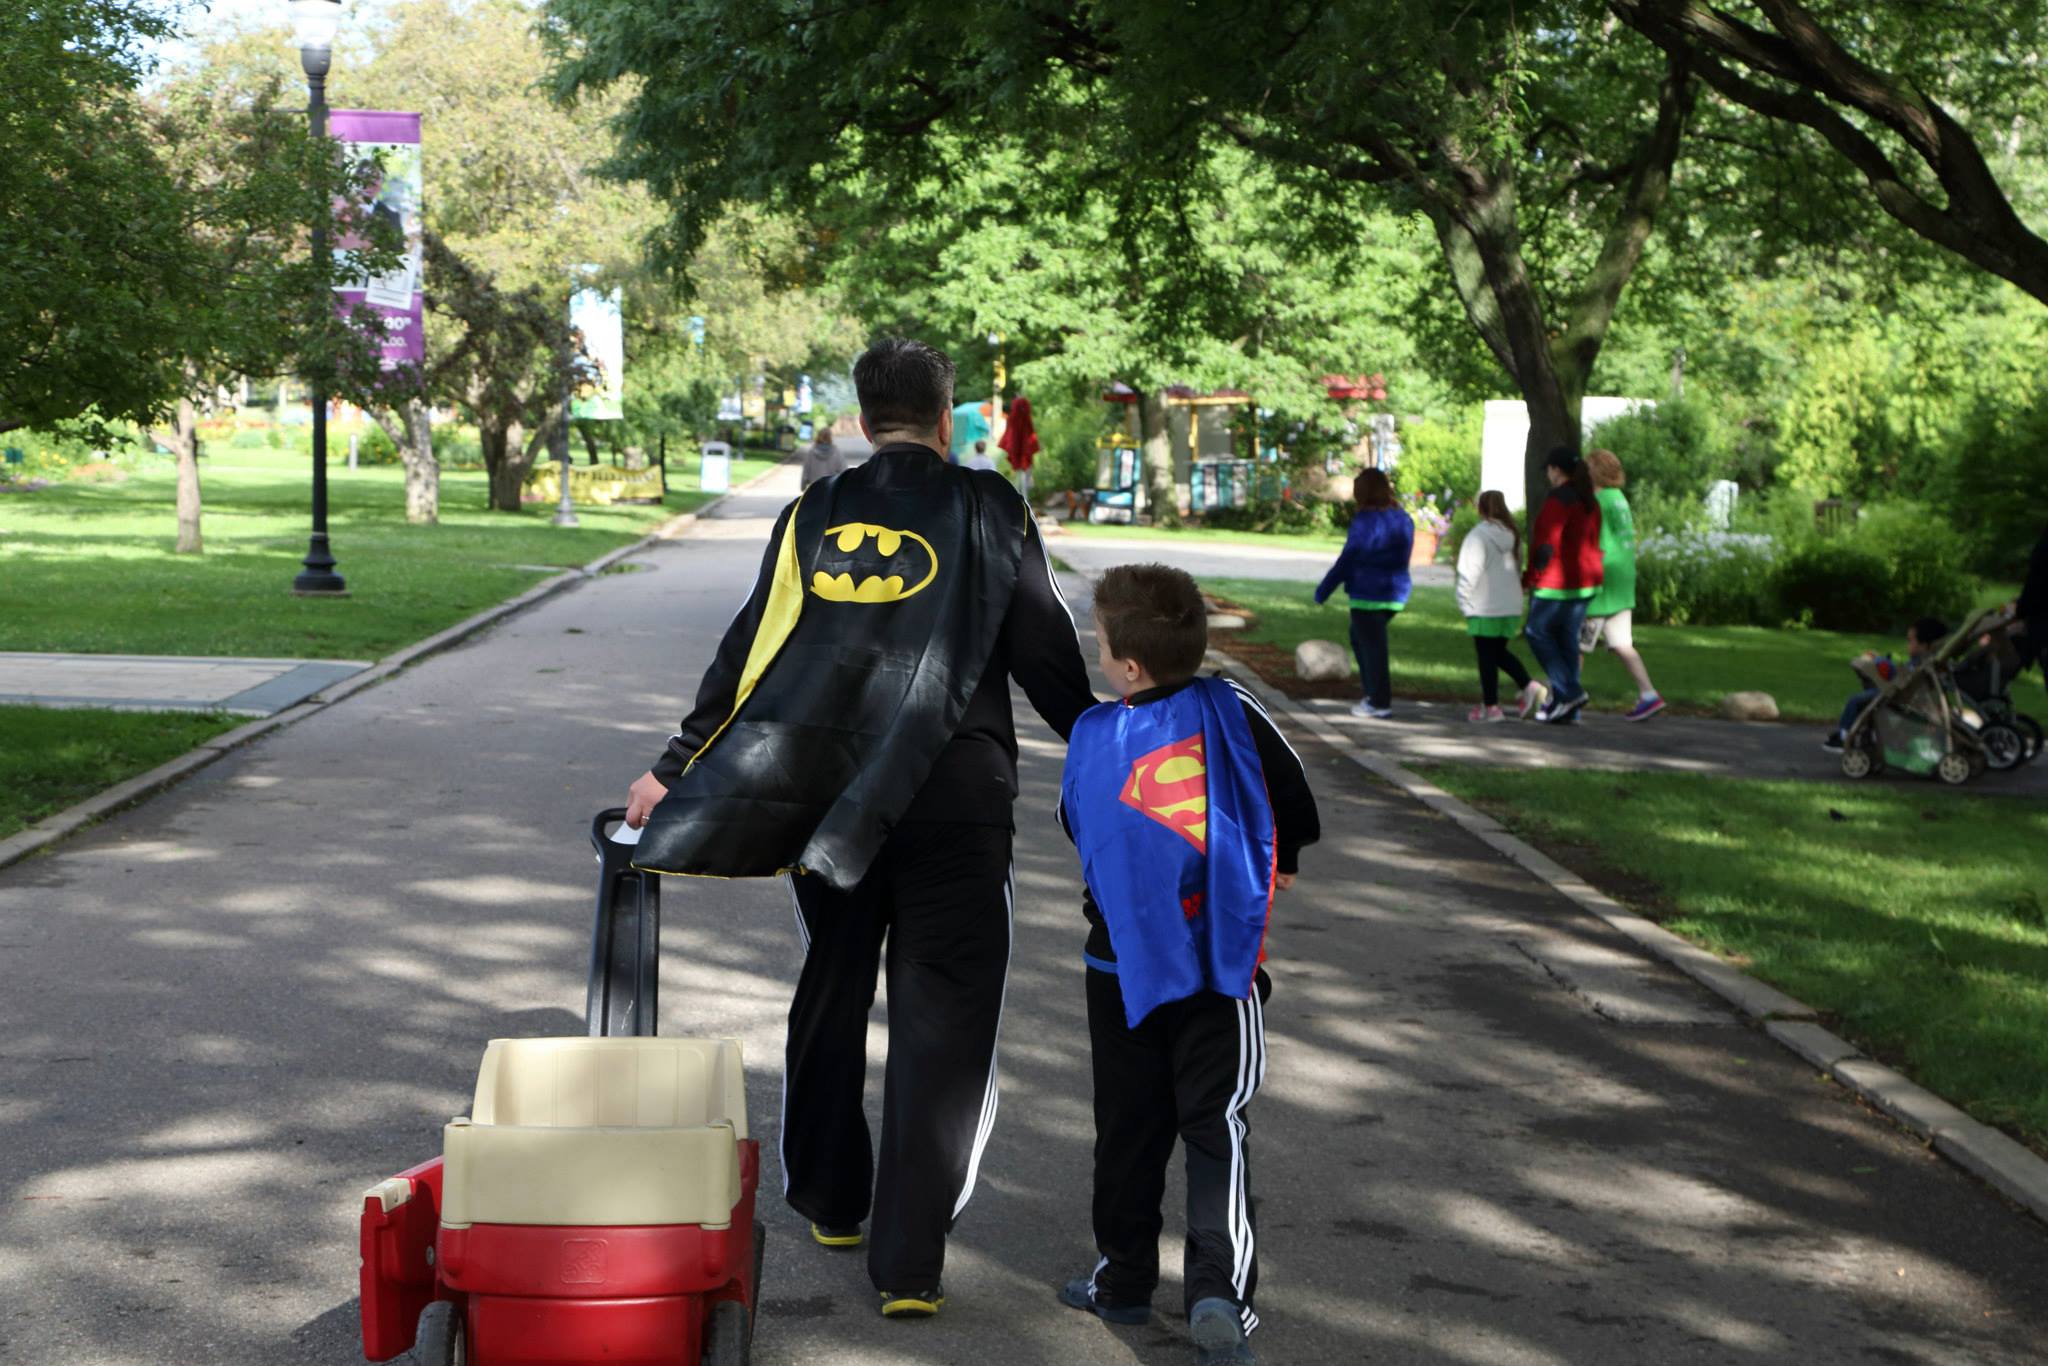 2nd Annual Autism Hero Family Walk Held July 31st Celebrates Michigan's Autism Heroes